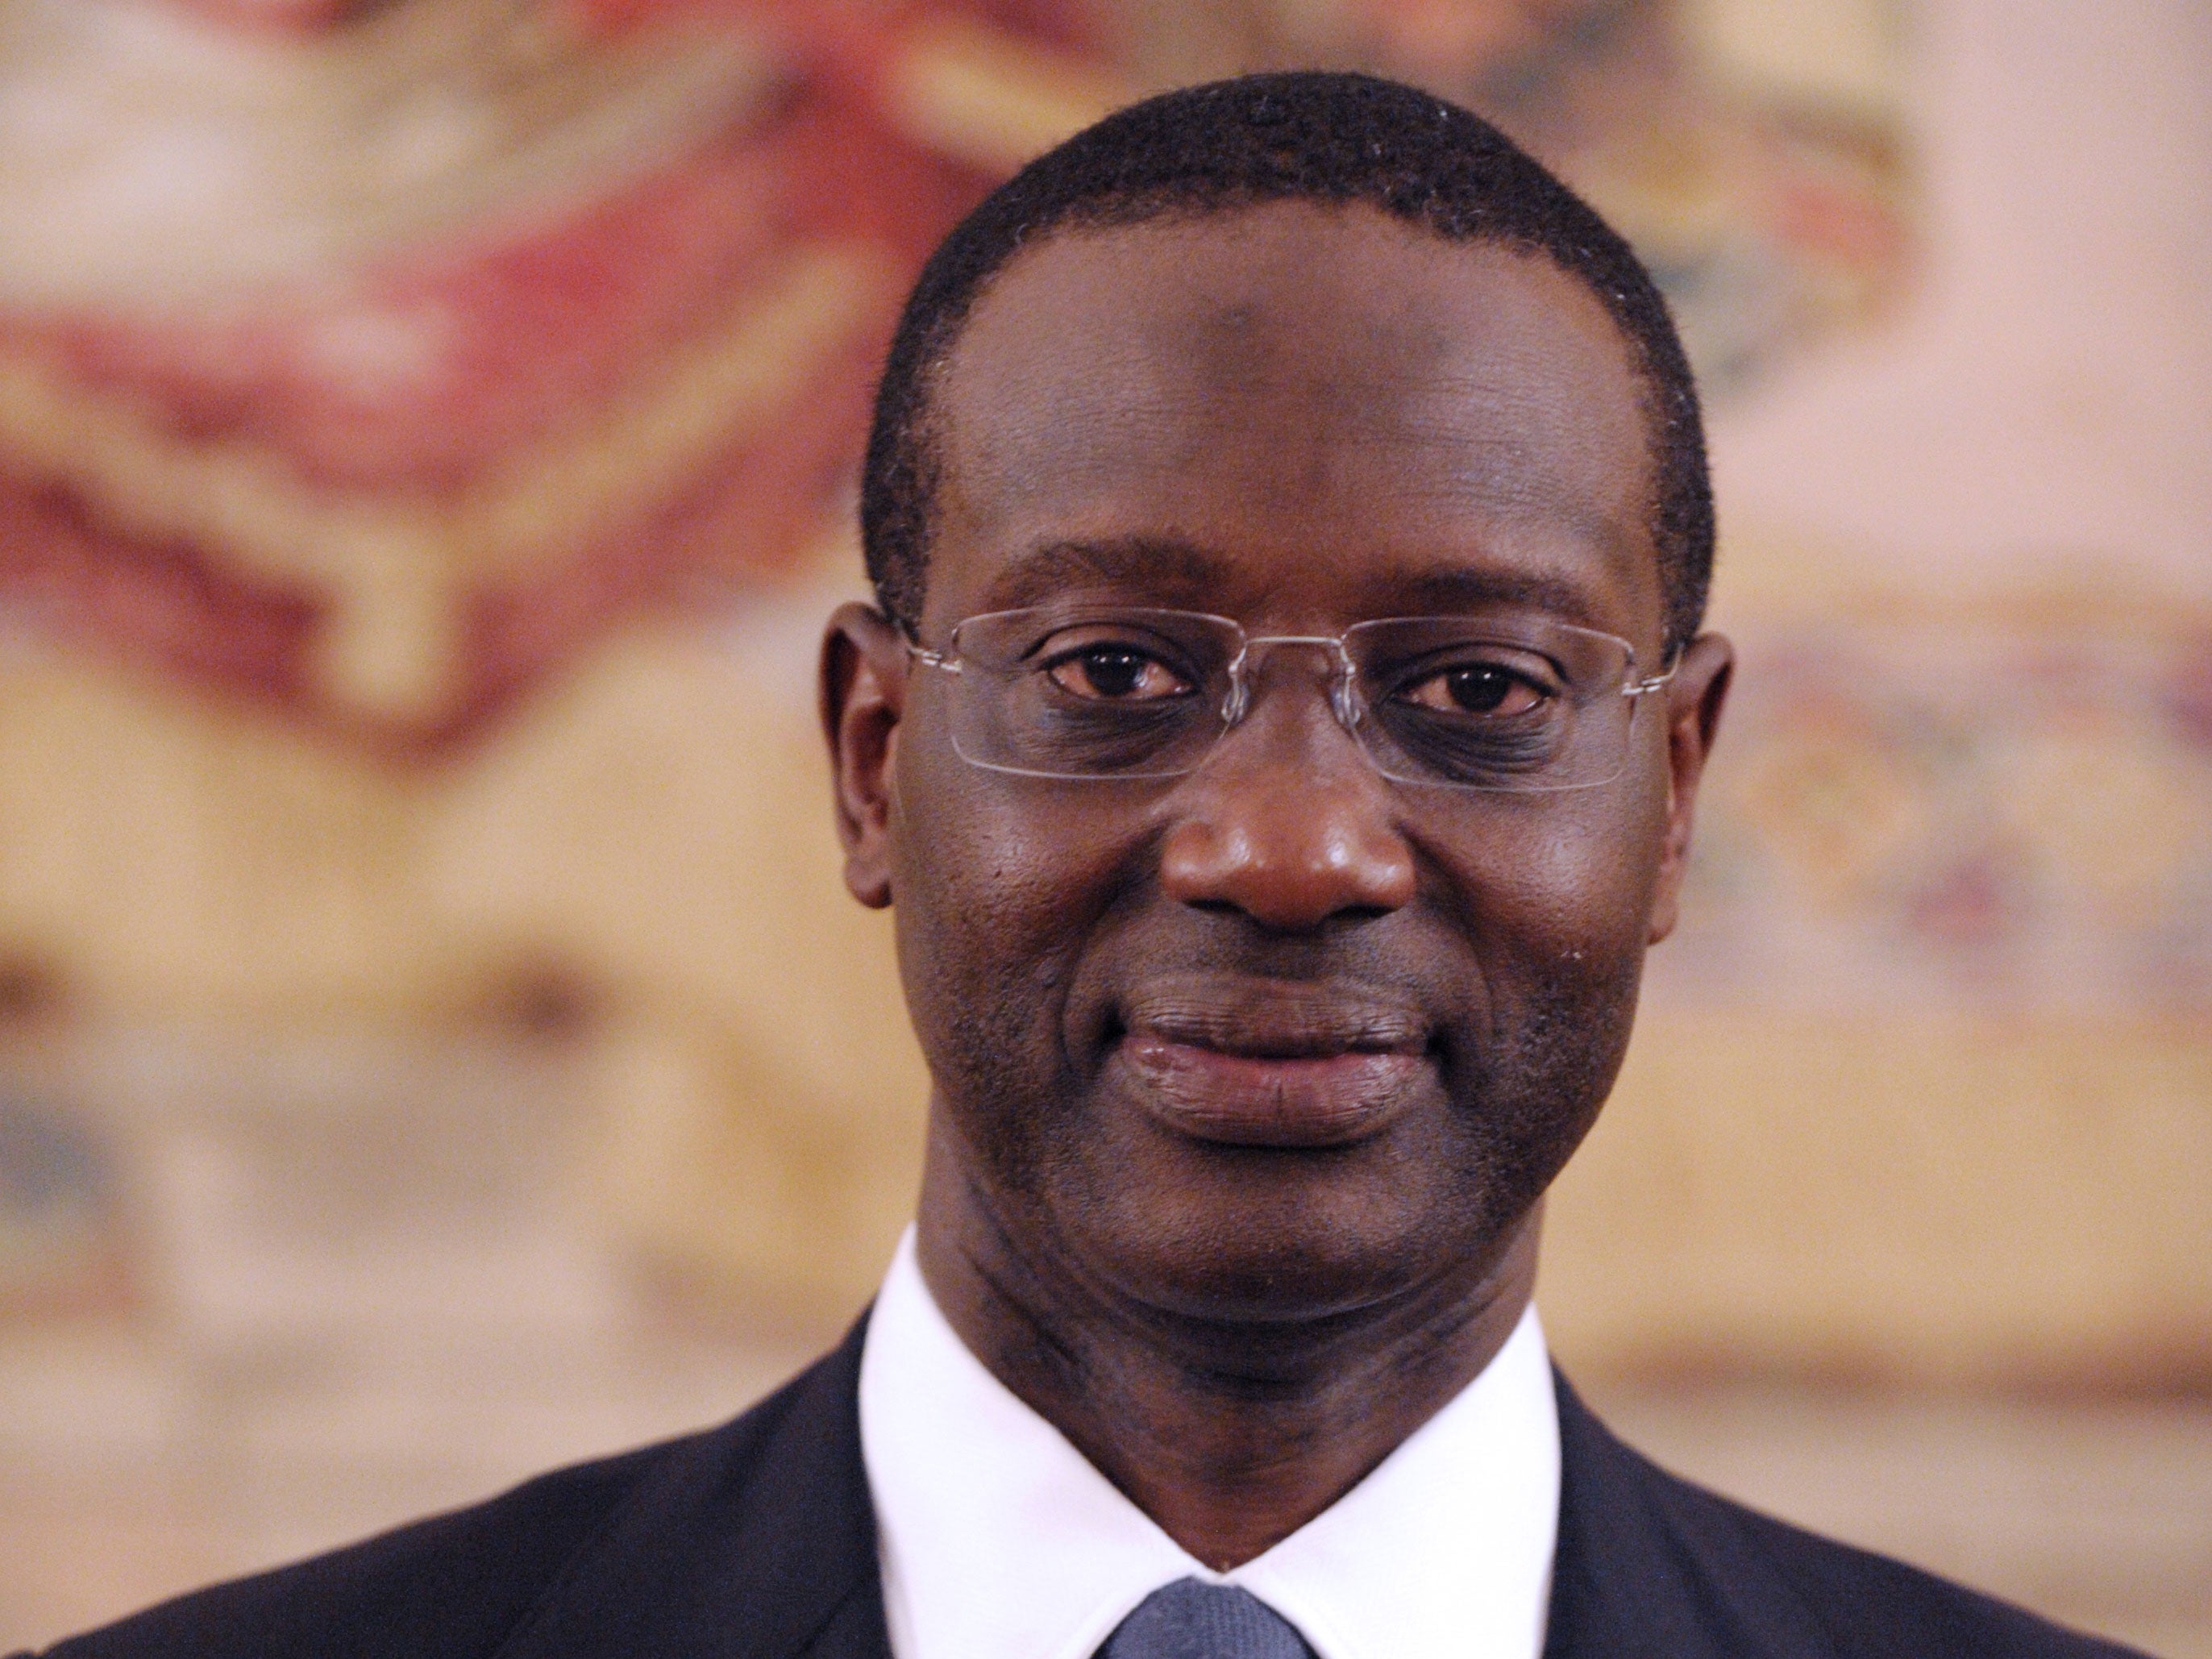 Mr Thiam, 52, is set to succeed Brady Dougan at Credit Suisse later this year.